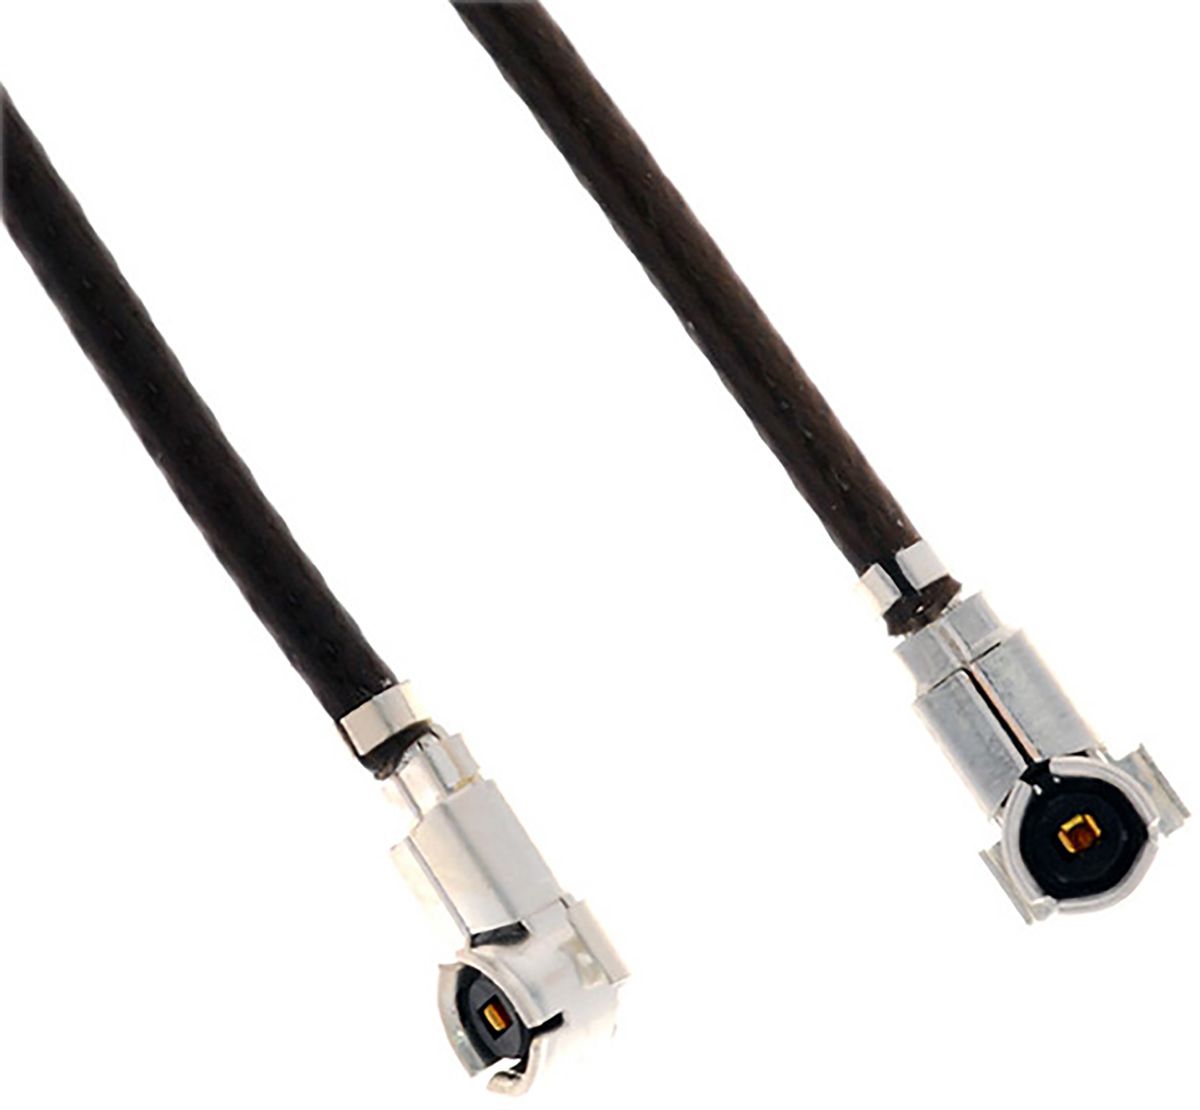 Hirose Male W.FL to Male W.FL Coaxial Cable, 50 Ω, 100mm